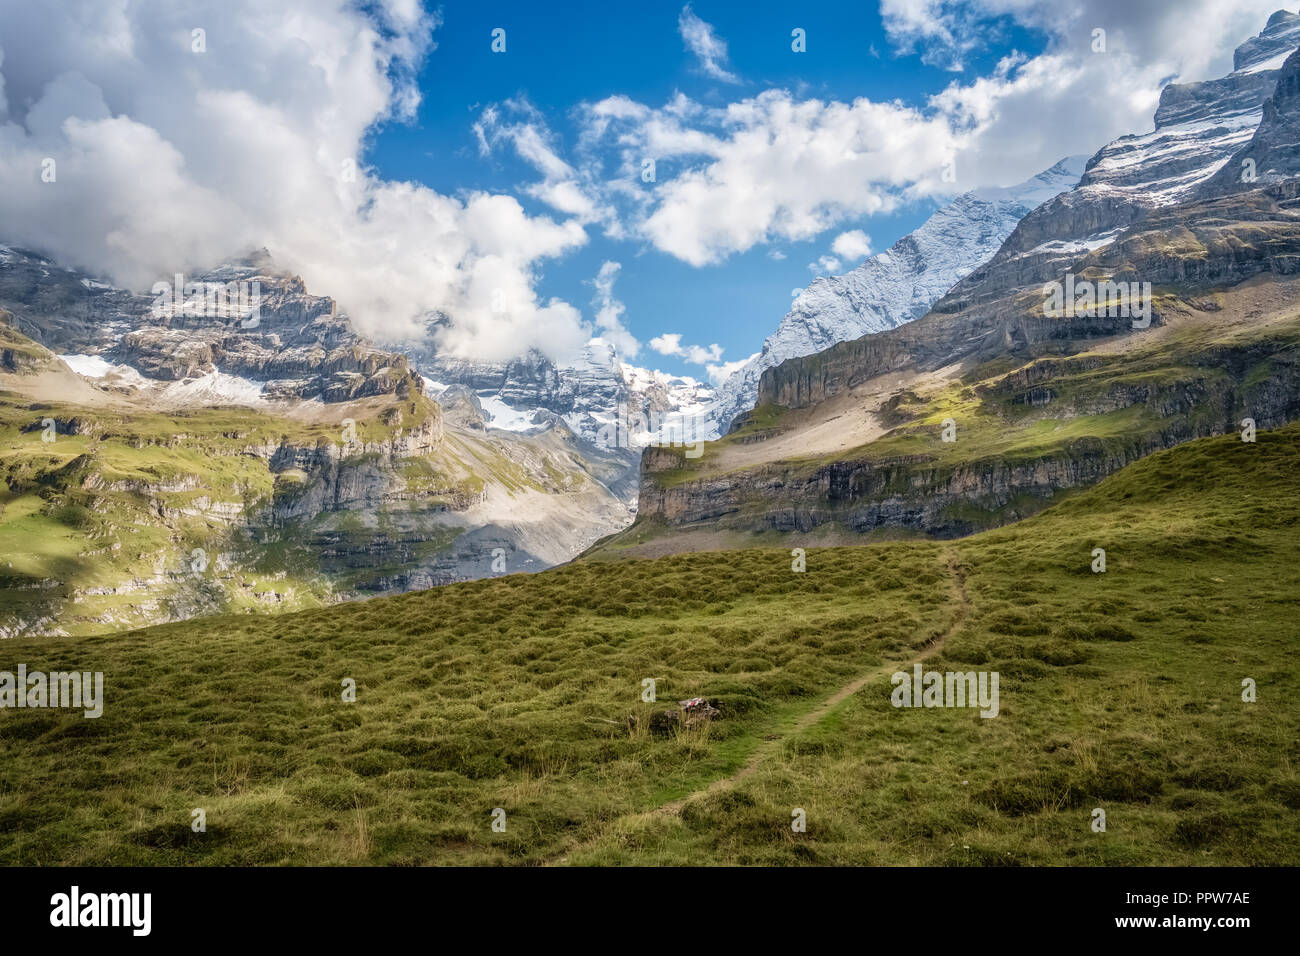 Spectacular views in Kiental while walkink from Griesalp to Obere Bundalp. Kiental is a village and valley in the Bernese Alps (Switzerland) Stock Photo